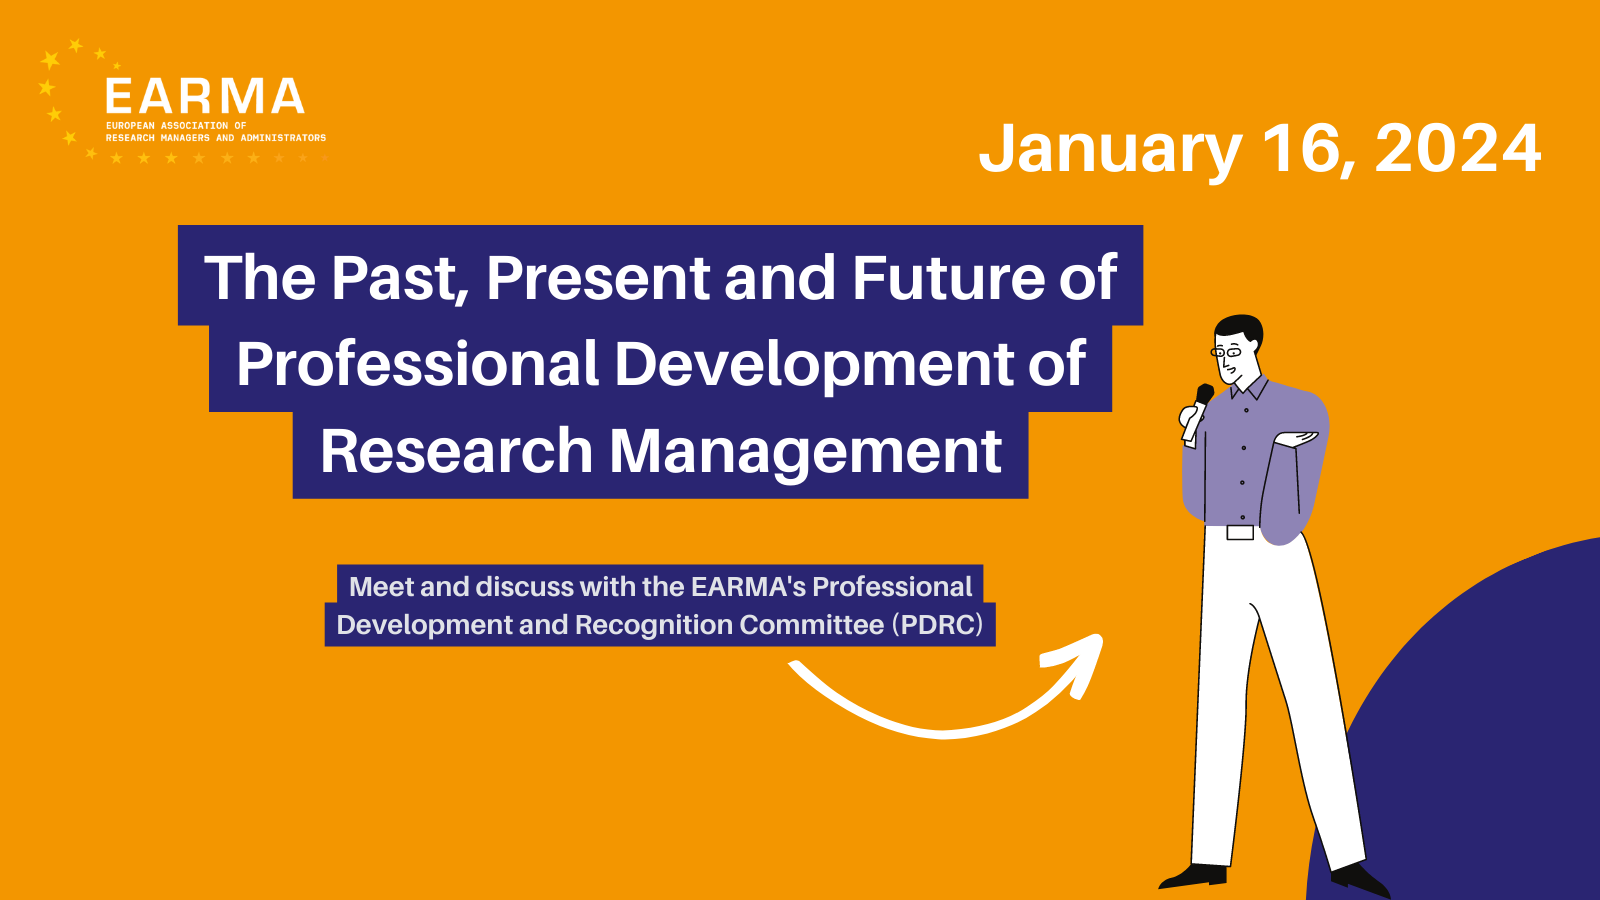 The Past, Present and Future of Professional Development of Research Management